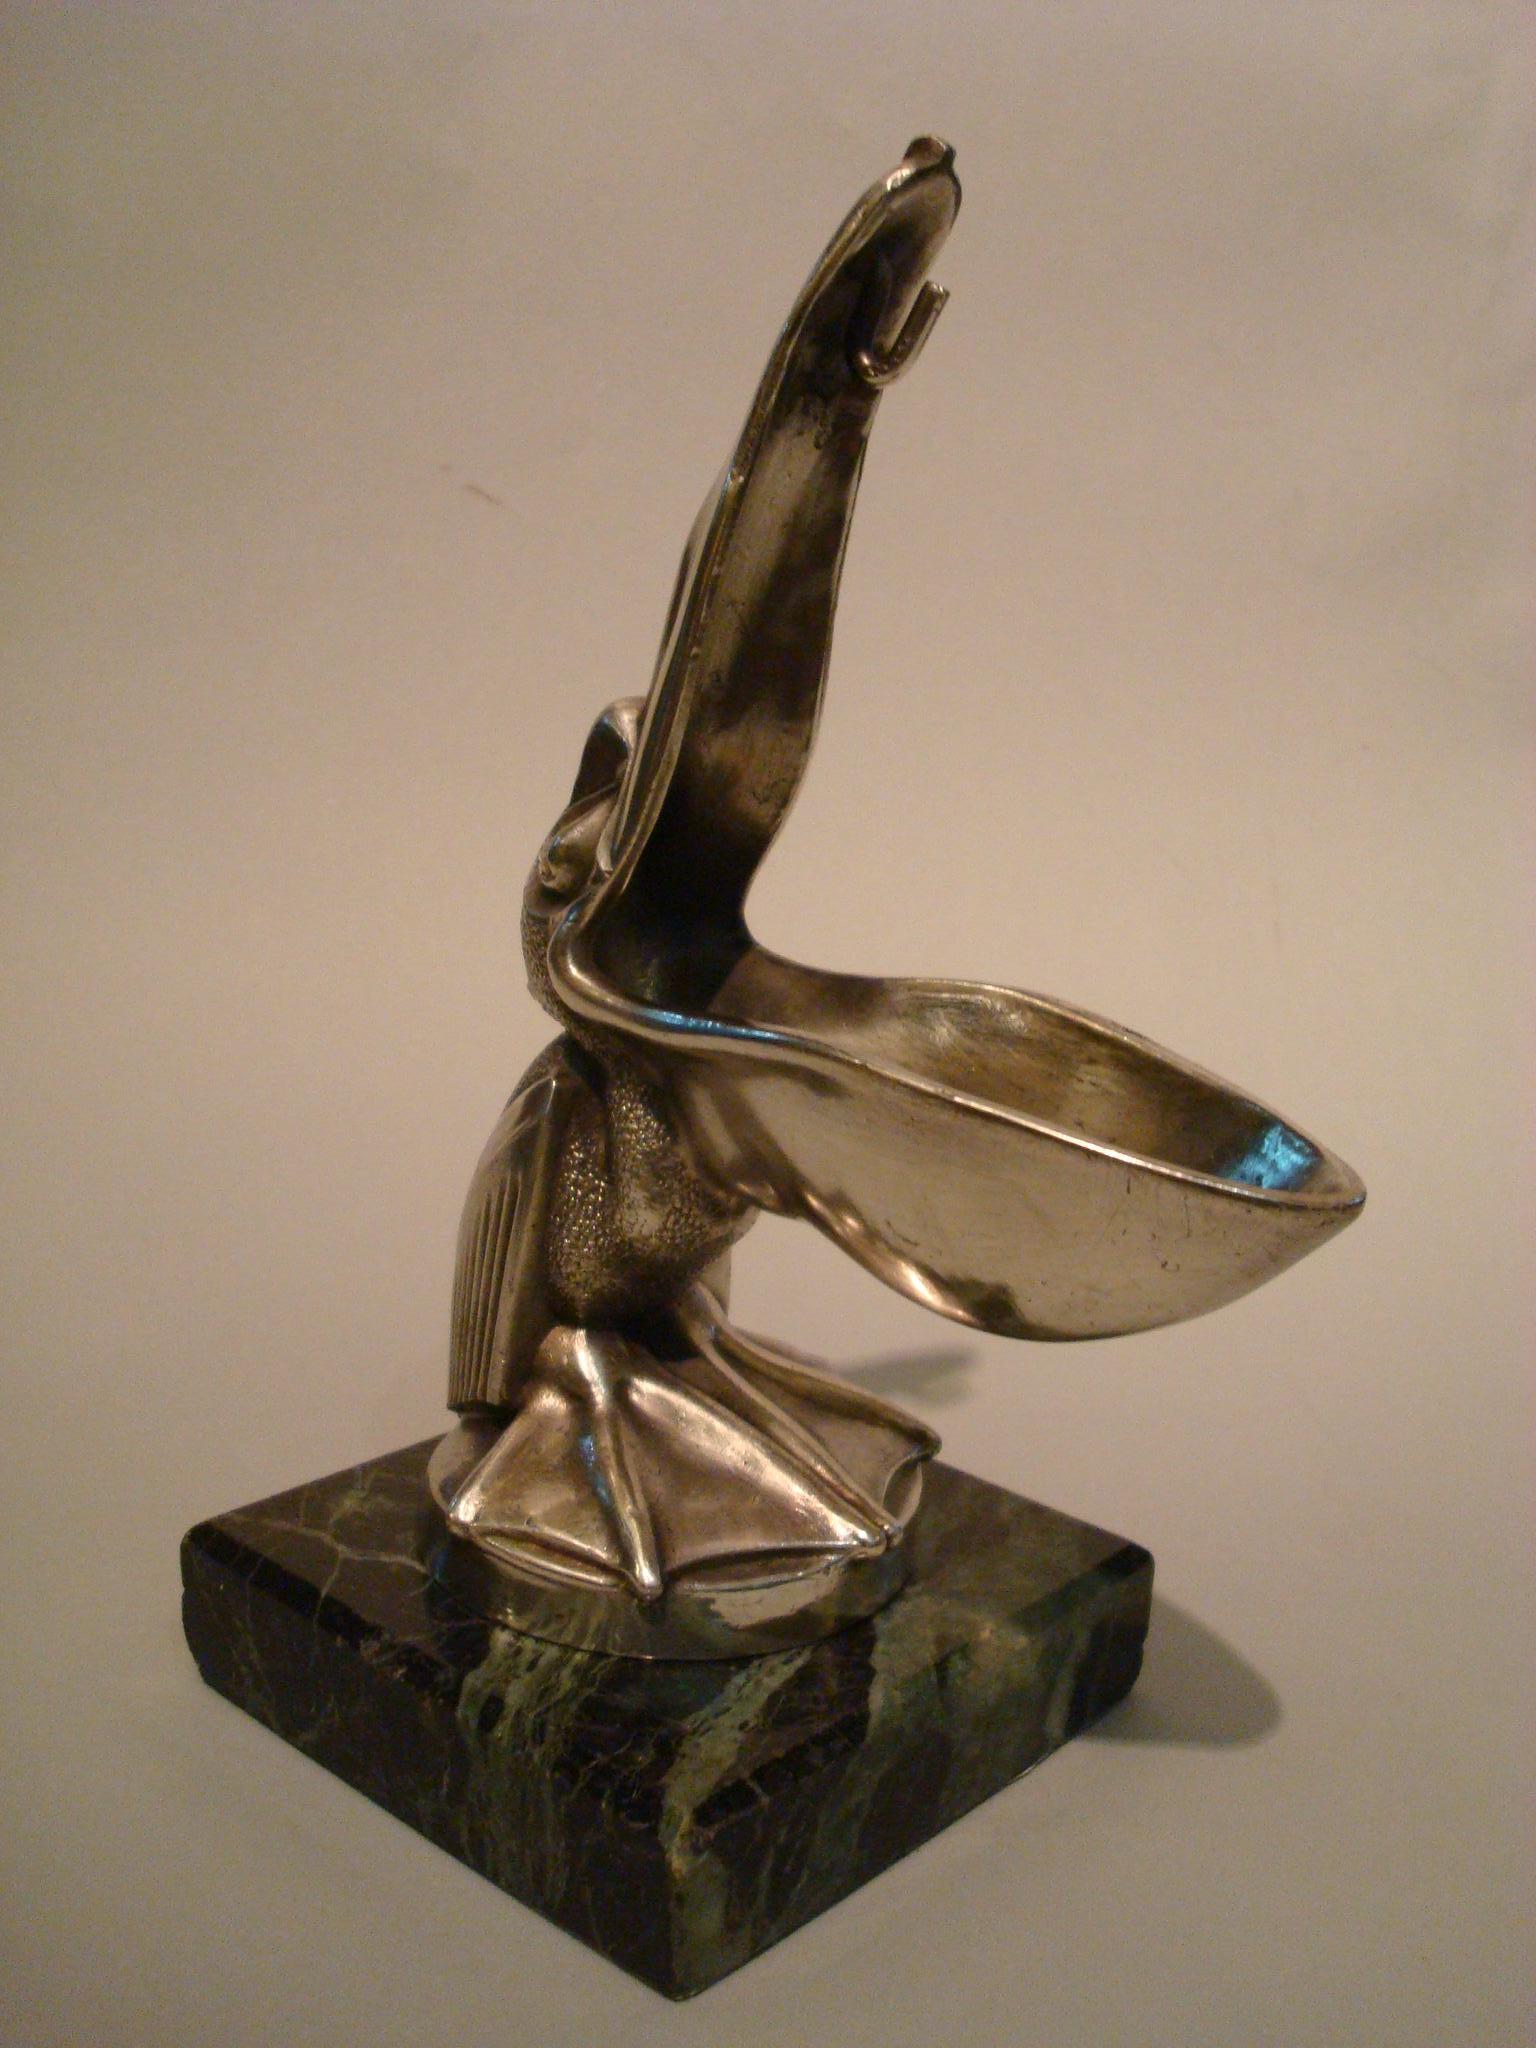 Silvered Art Deco Pelican Le Verrier Sculpture Car Mascot Paperweight Packet Watch Holder For Sale